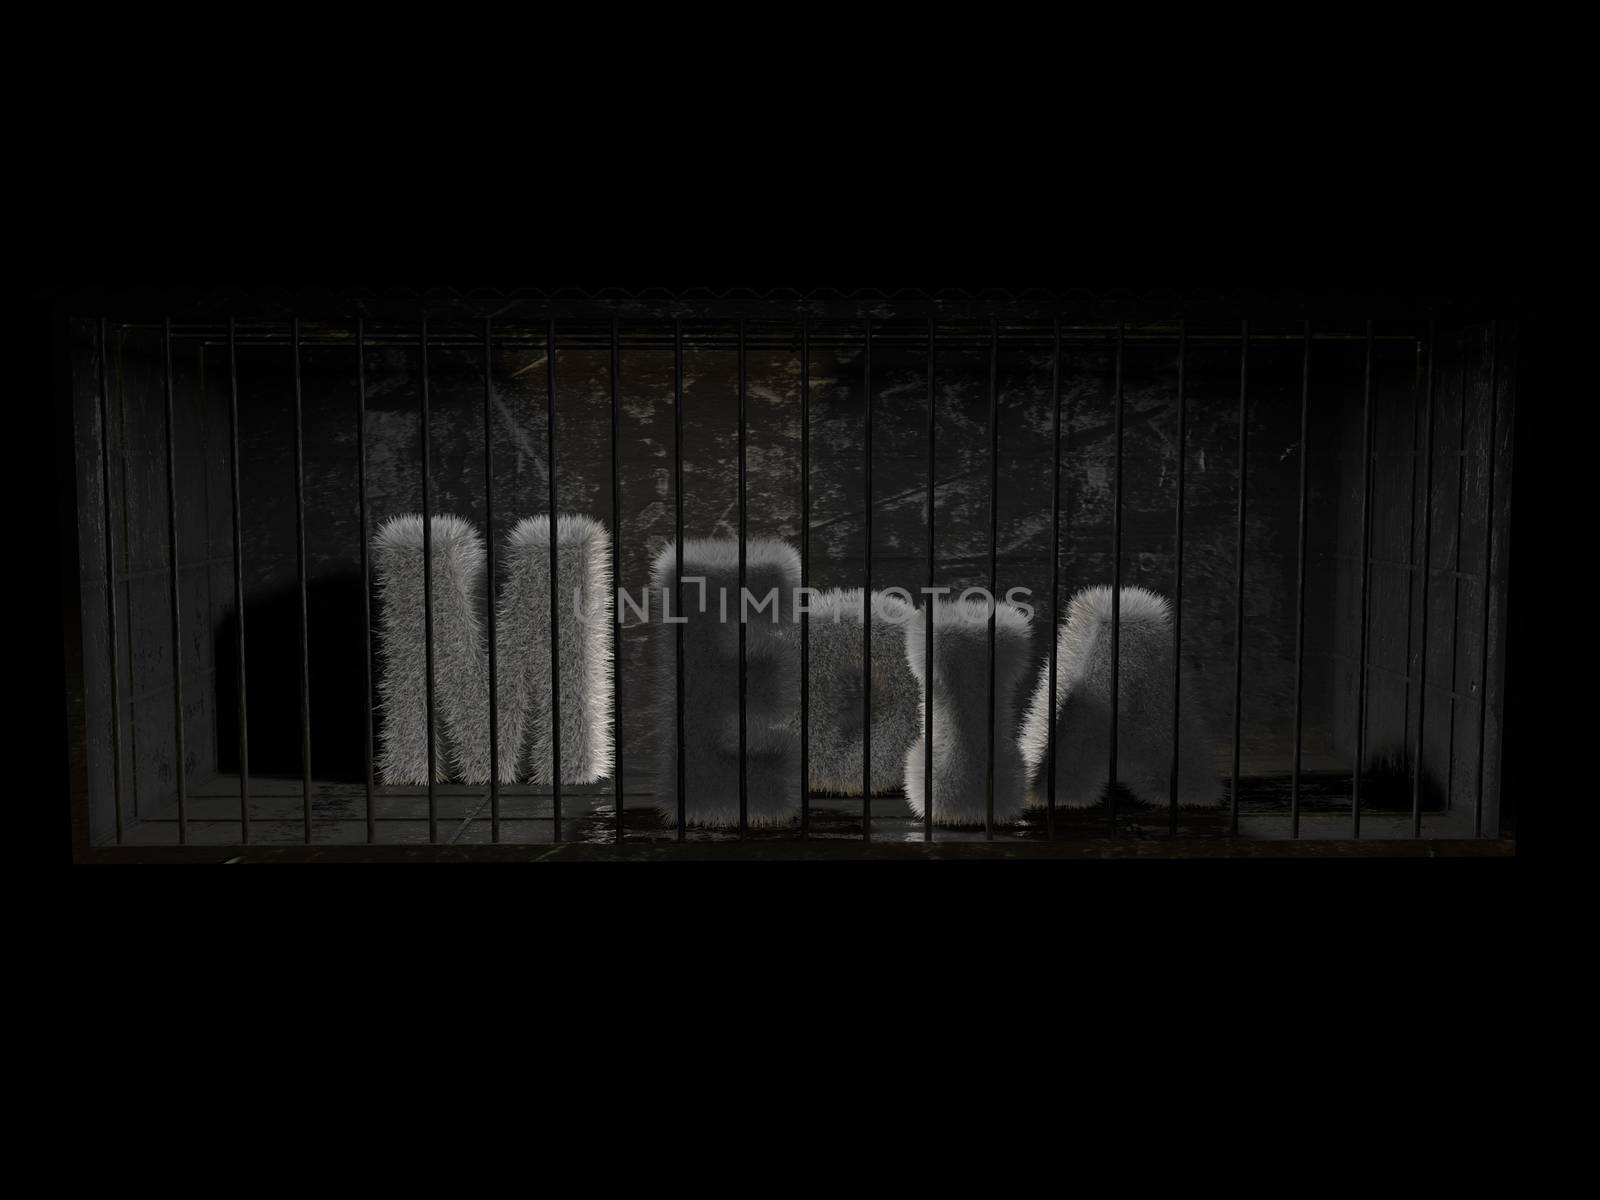 A fluffy word (media) with white hair behind bars with black background.